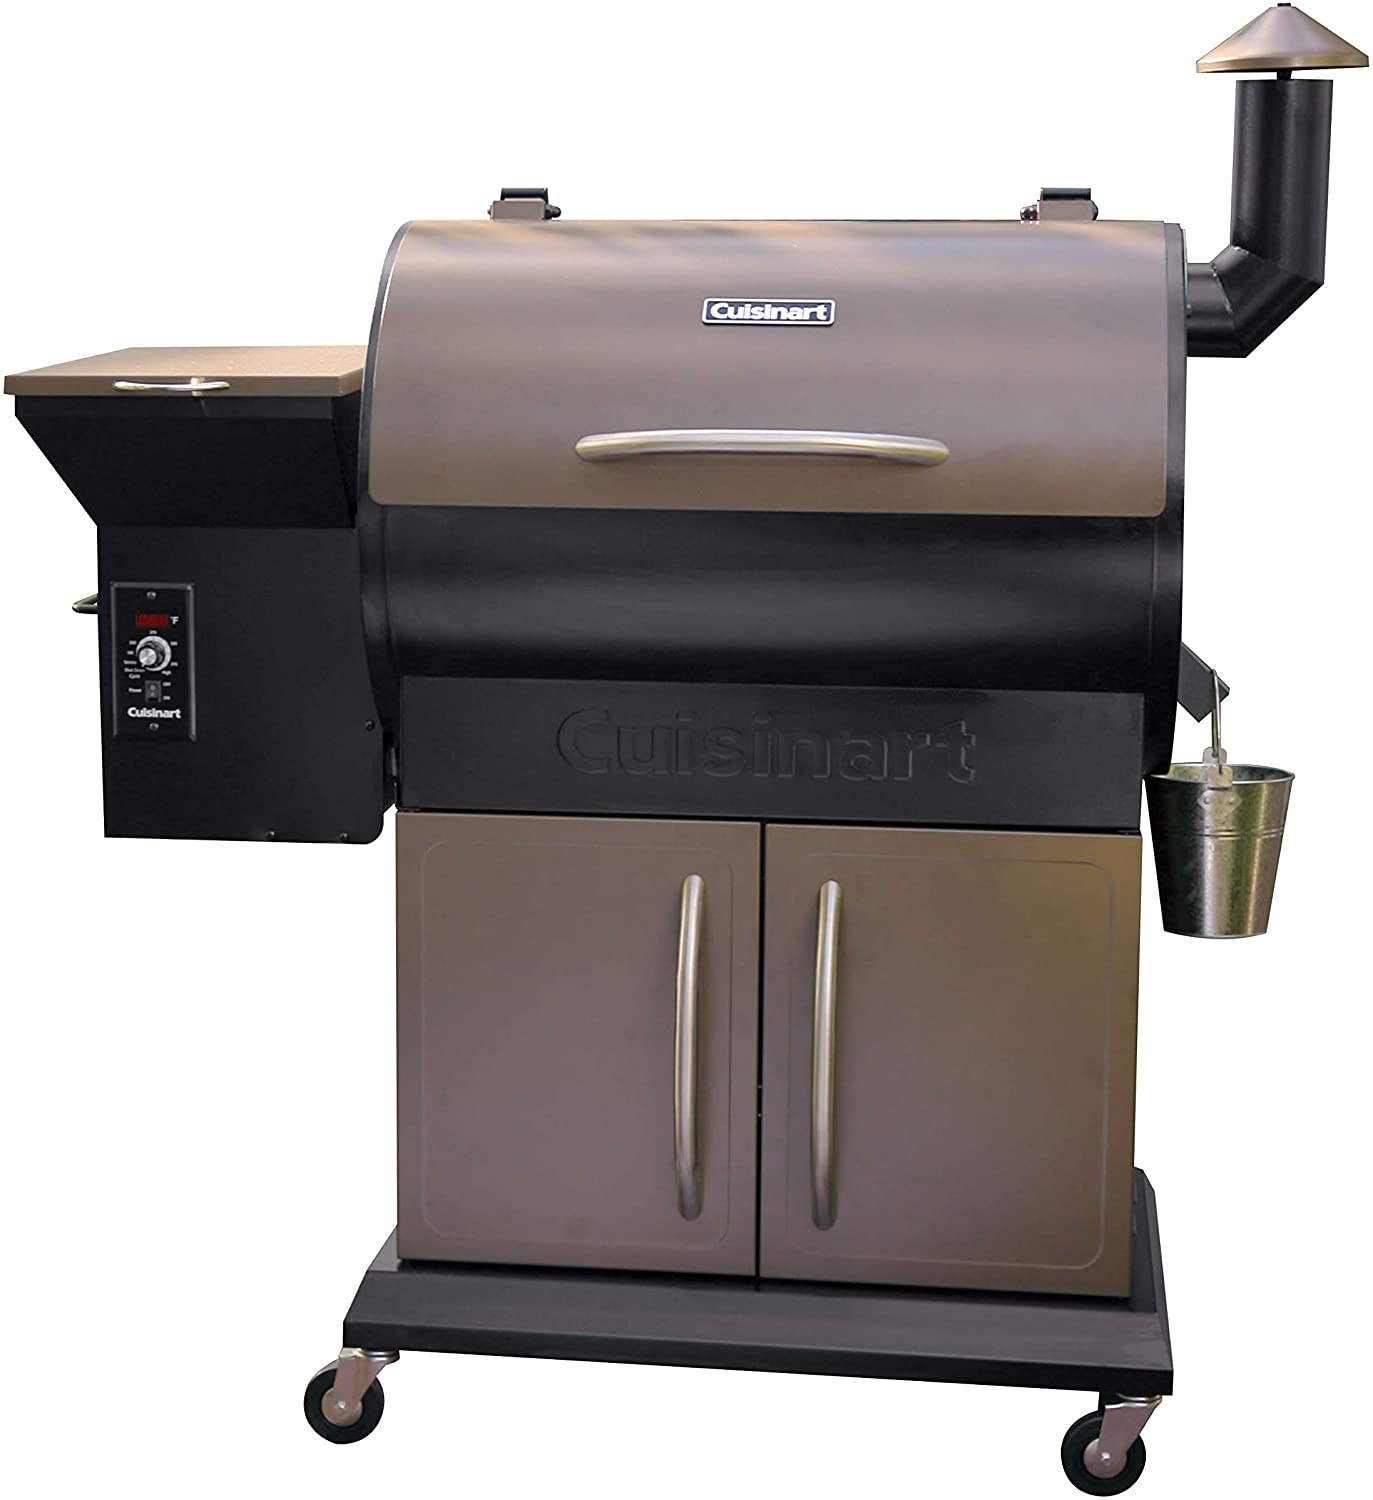 Cuisinart Bonus Cover Included uisinart CPG-6000 Grill & Smoker, 51 Inch, Deluxe Wood Pellet Grill and Smoker - $288.56